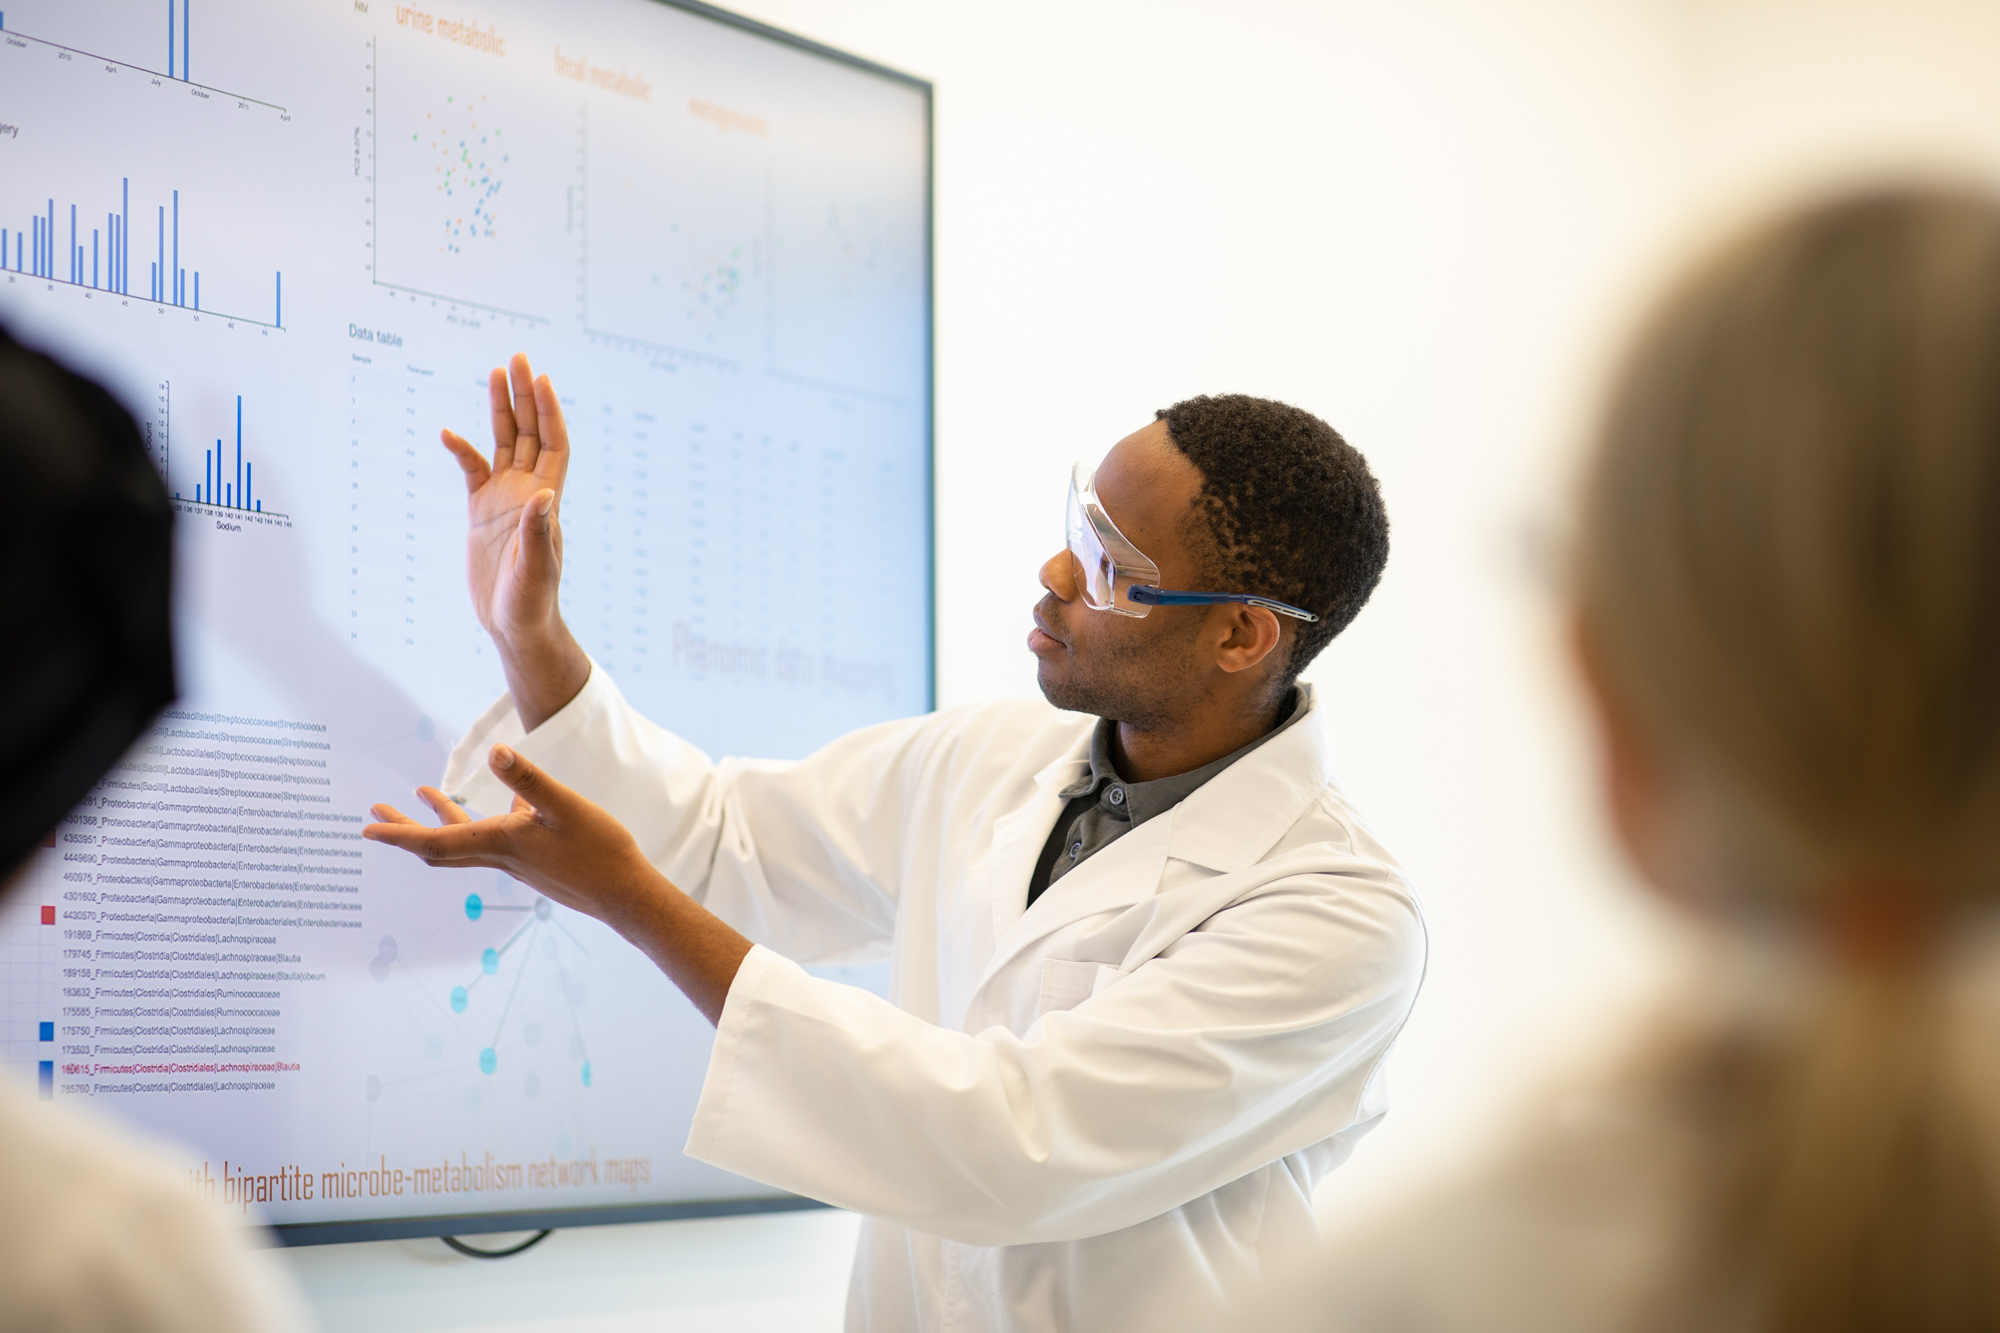 Male medical scientist gesturing and describing data on a screen during a meeting